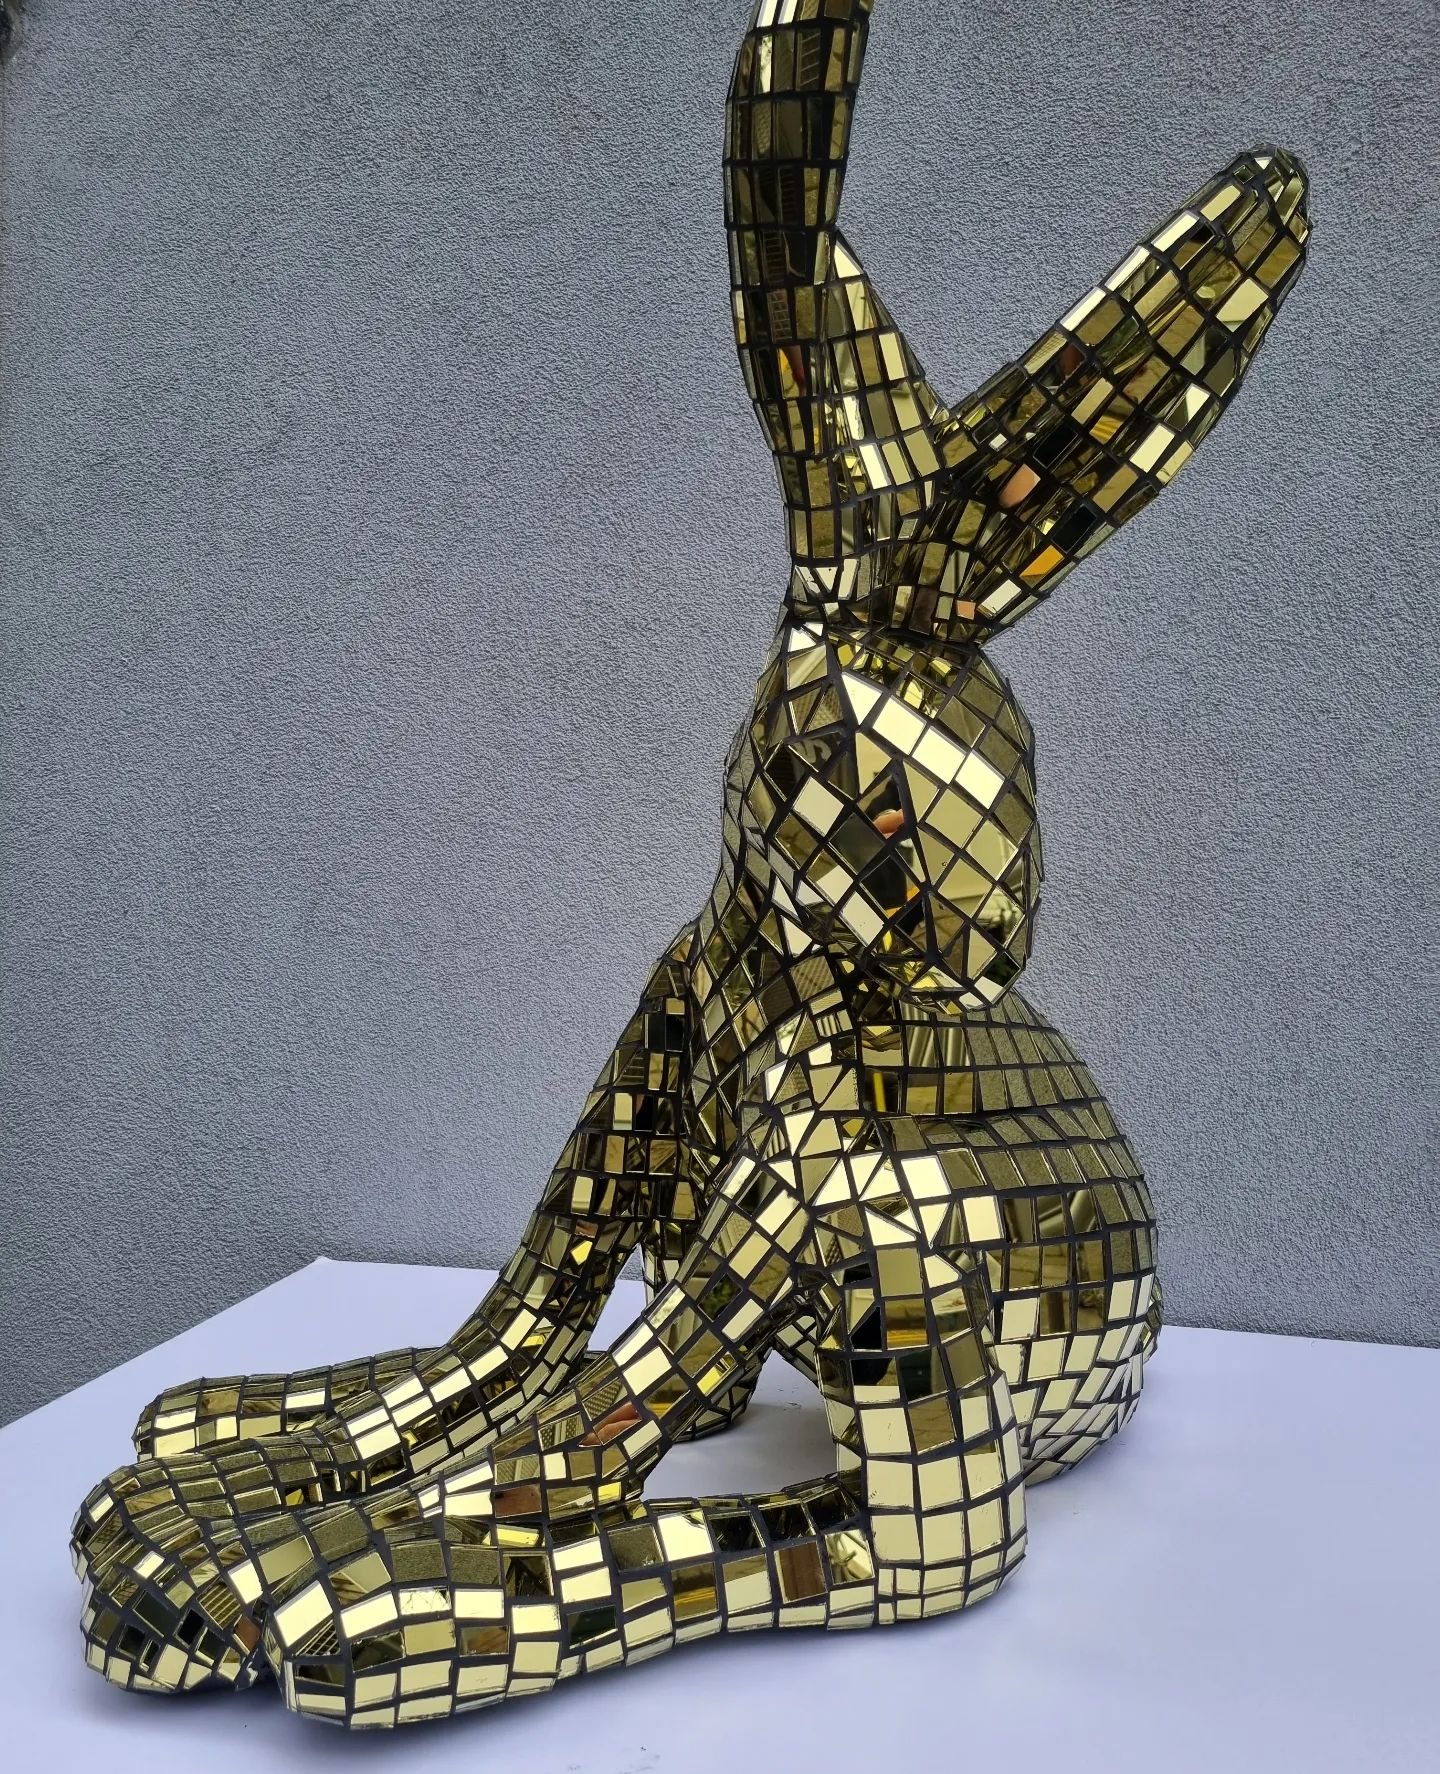 The Golden Hare - Studio Collaboration
.
It has been a long while since we made a mosaic sculpture. Dazzzzling!!!! 
.
Thank you @searle.brian for doing such a grand job on the mosaic tiling. It is going to be adored in it's new home.